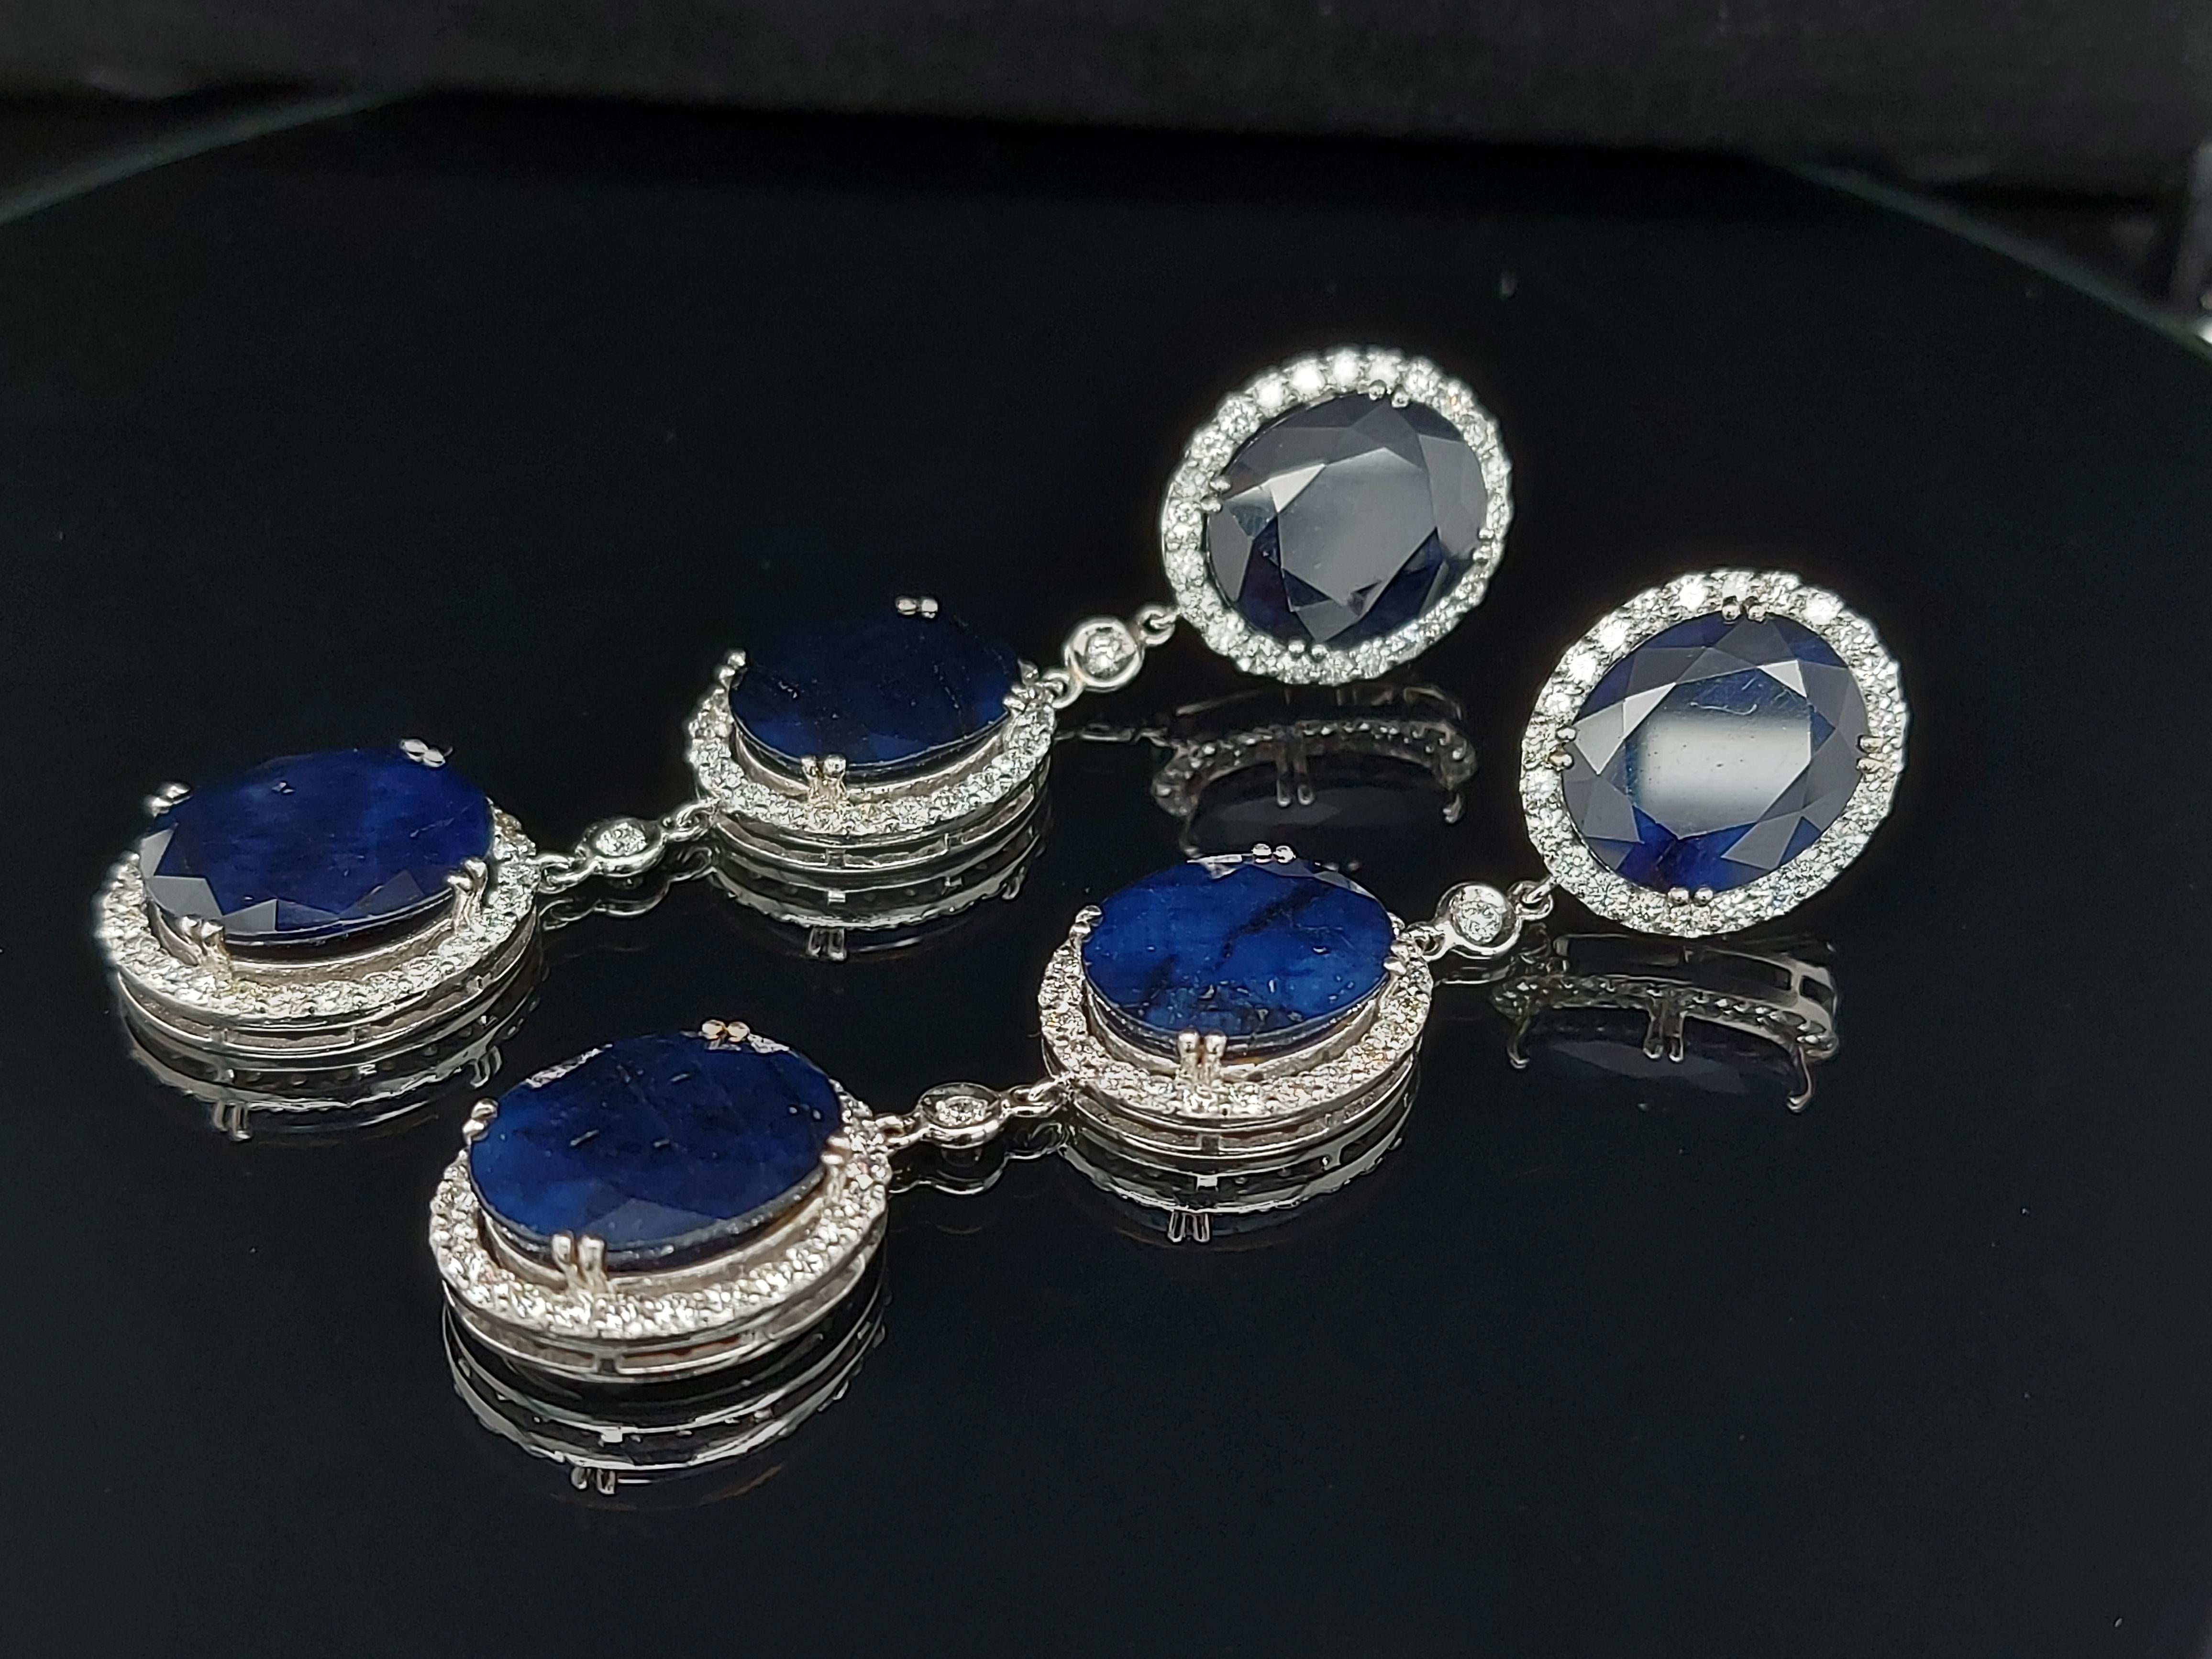 18kt White Gold Earrings 43.56ct Sapphire, 3.51ct Diamond For Sale 9